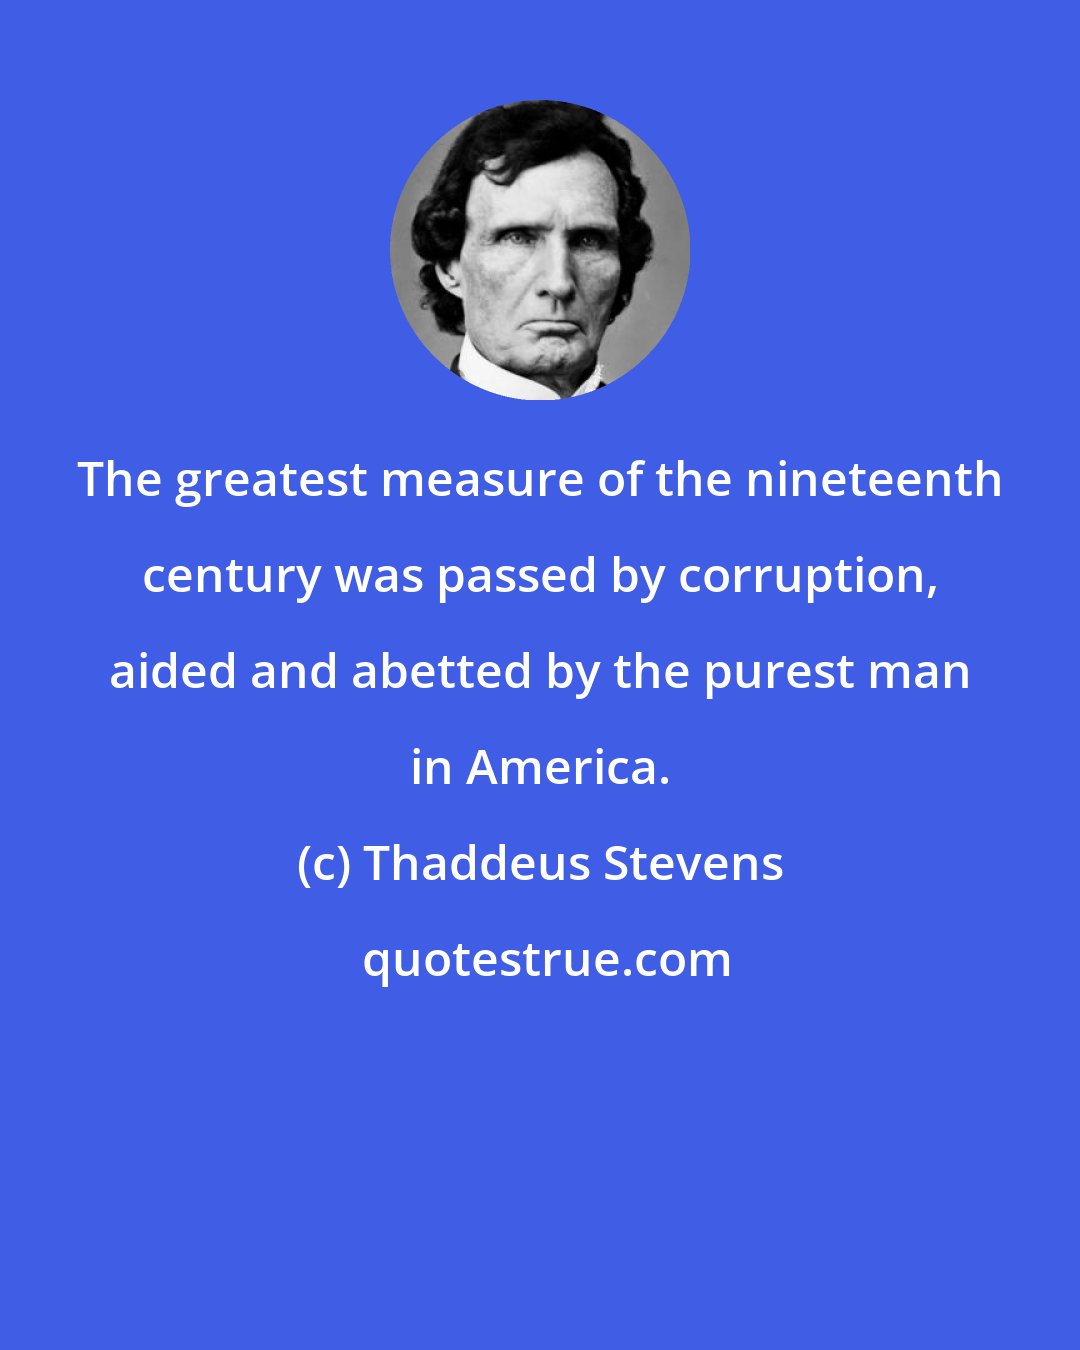 Thaddeus Stevens: The greatest measure of the nineteenth century was passed by corruption, aided and abetted by the purest man in America.